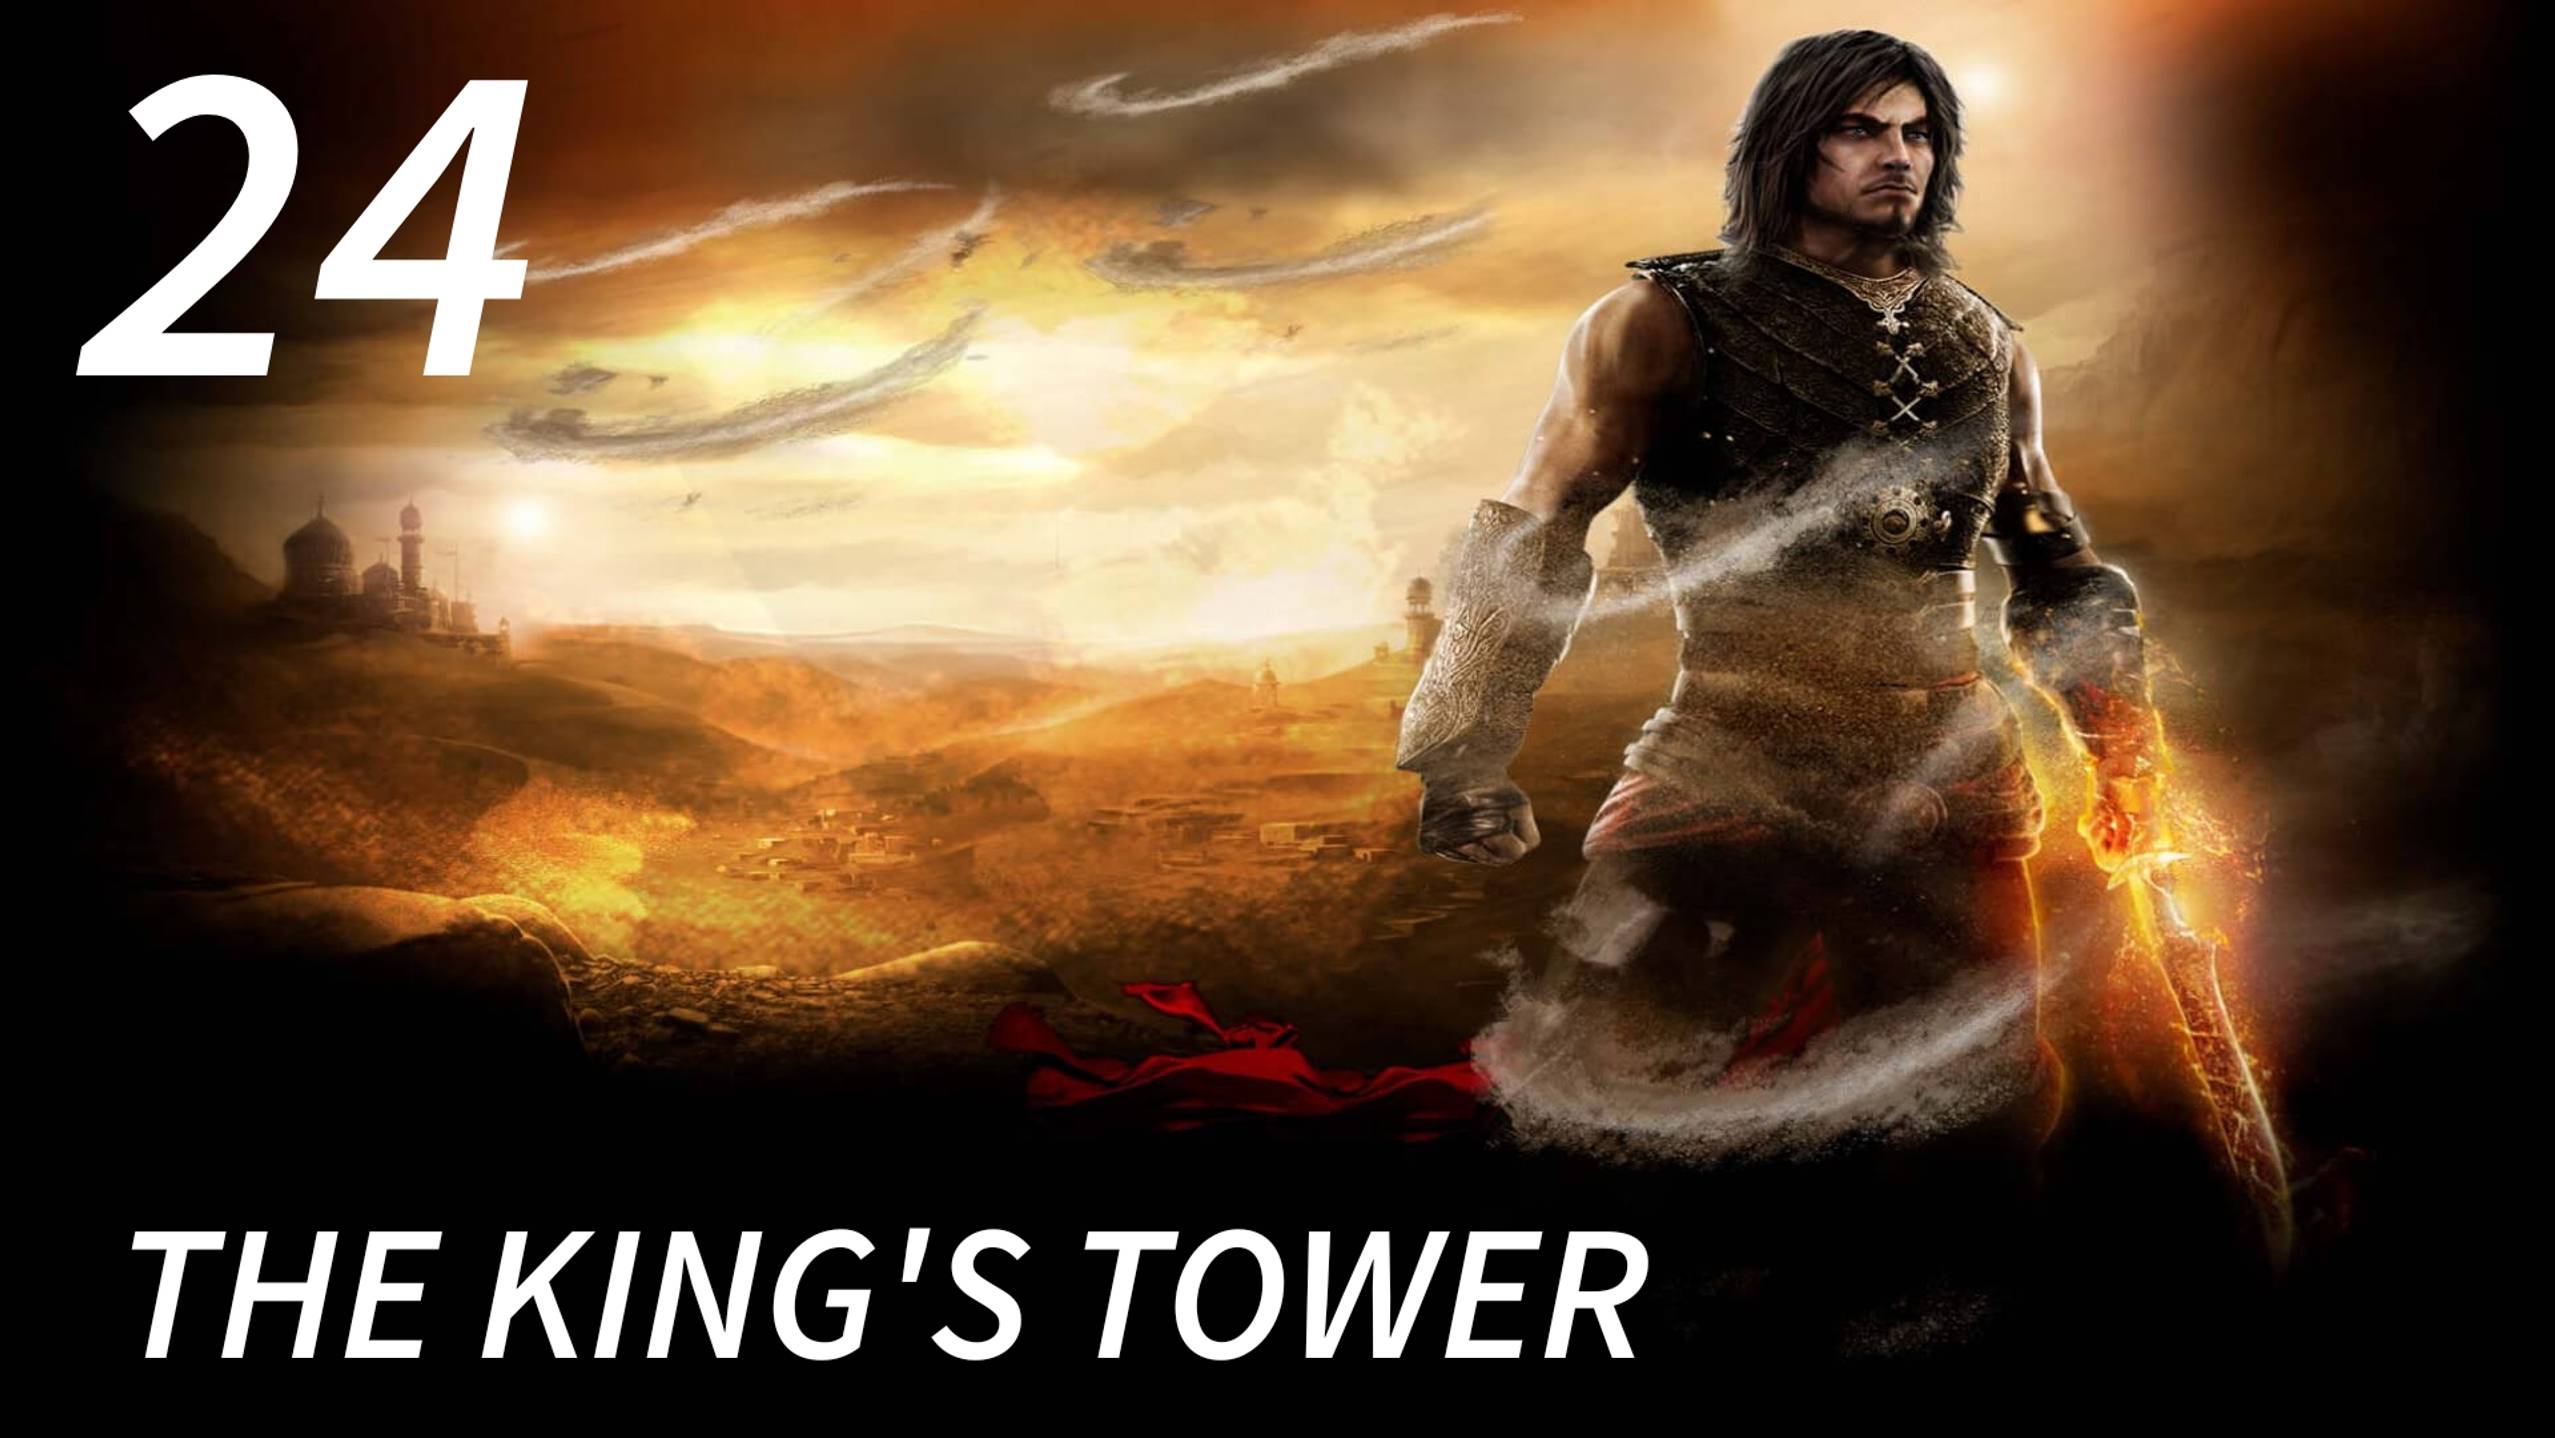 Prince of Persia: The Forgotten Sands / The King's Tower